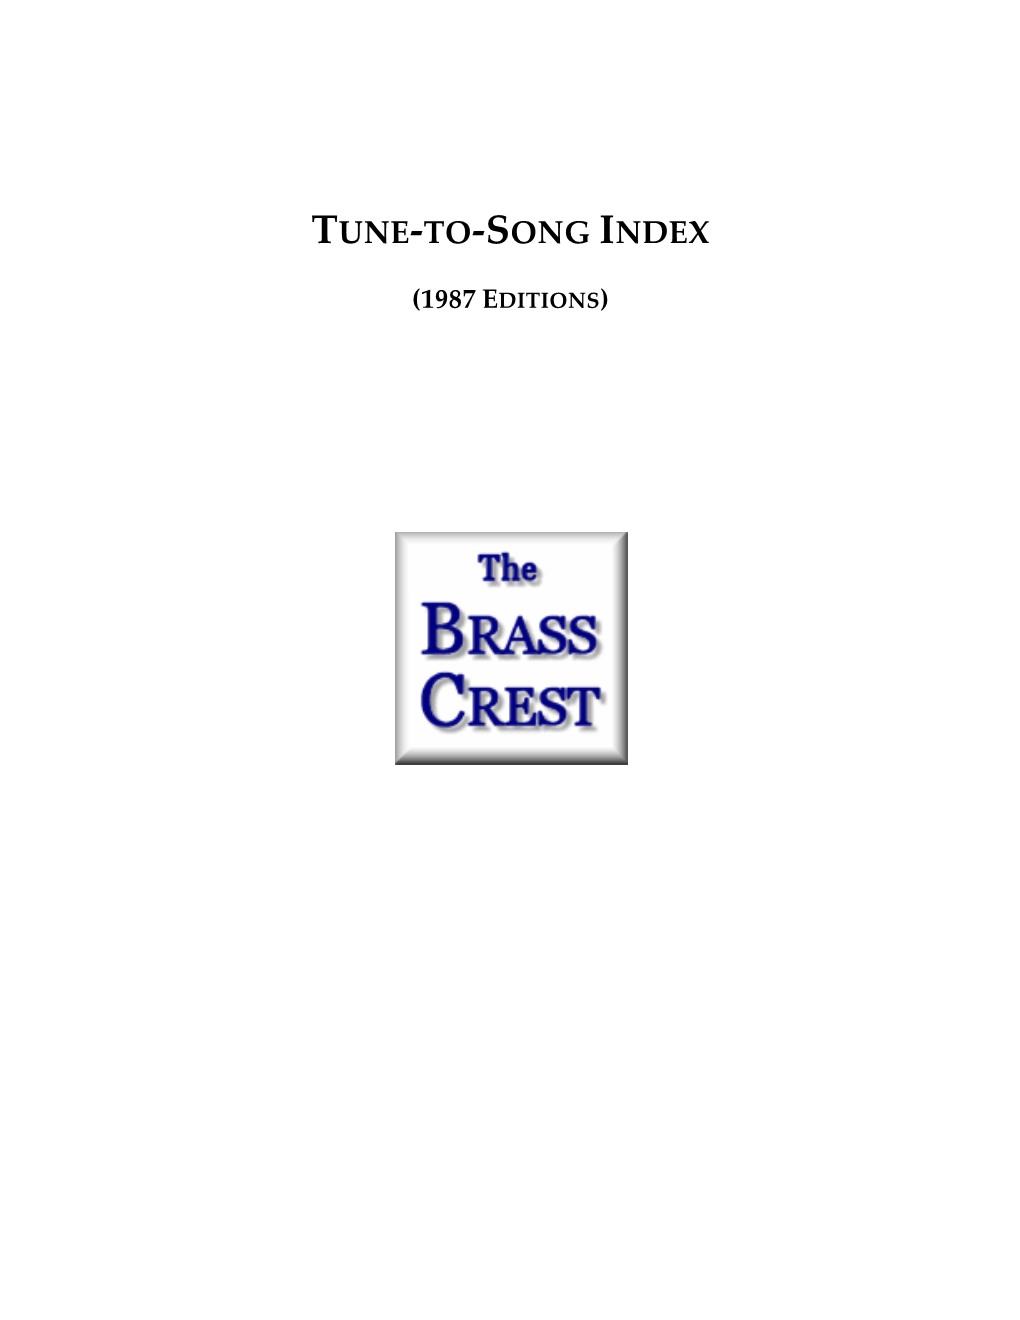 Tune-To-Song Index